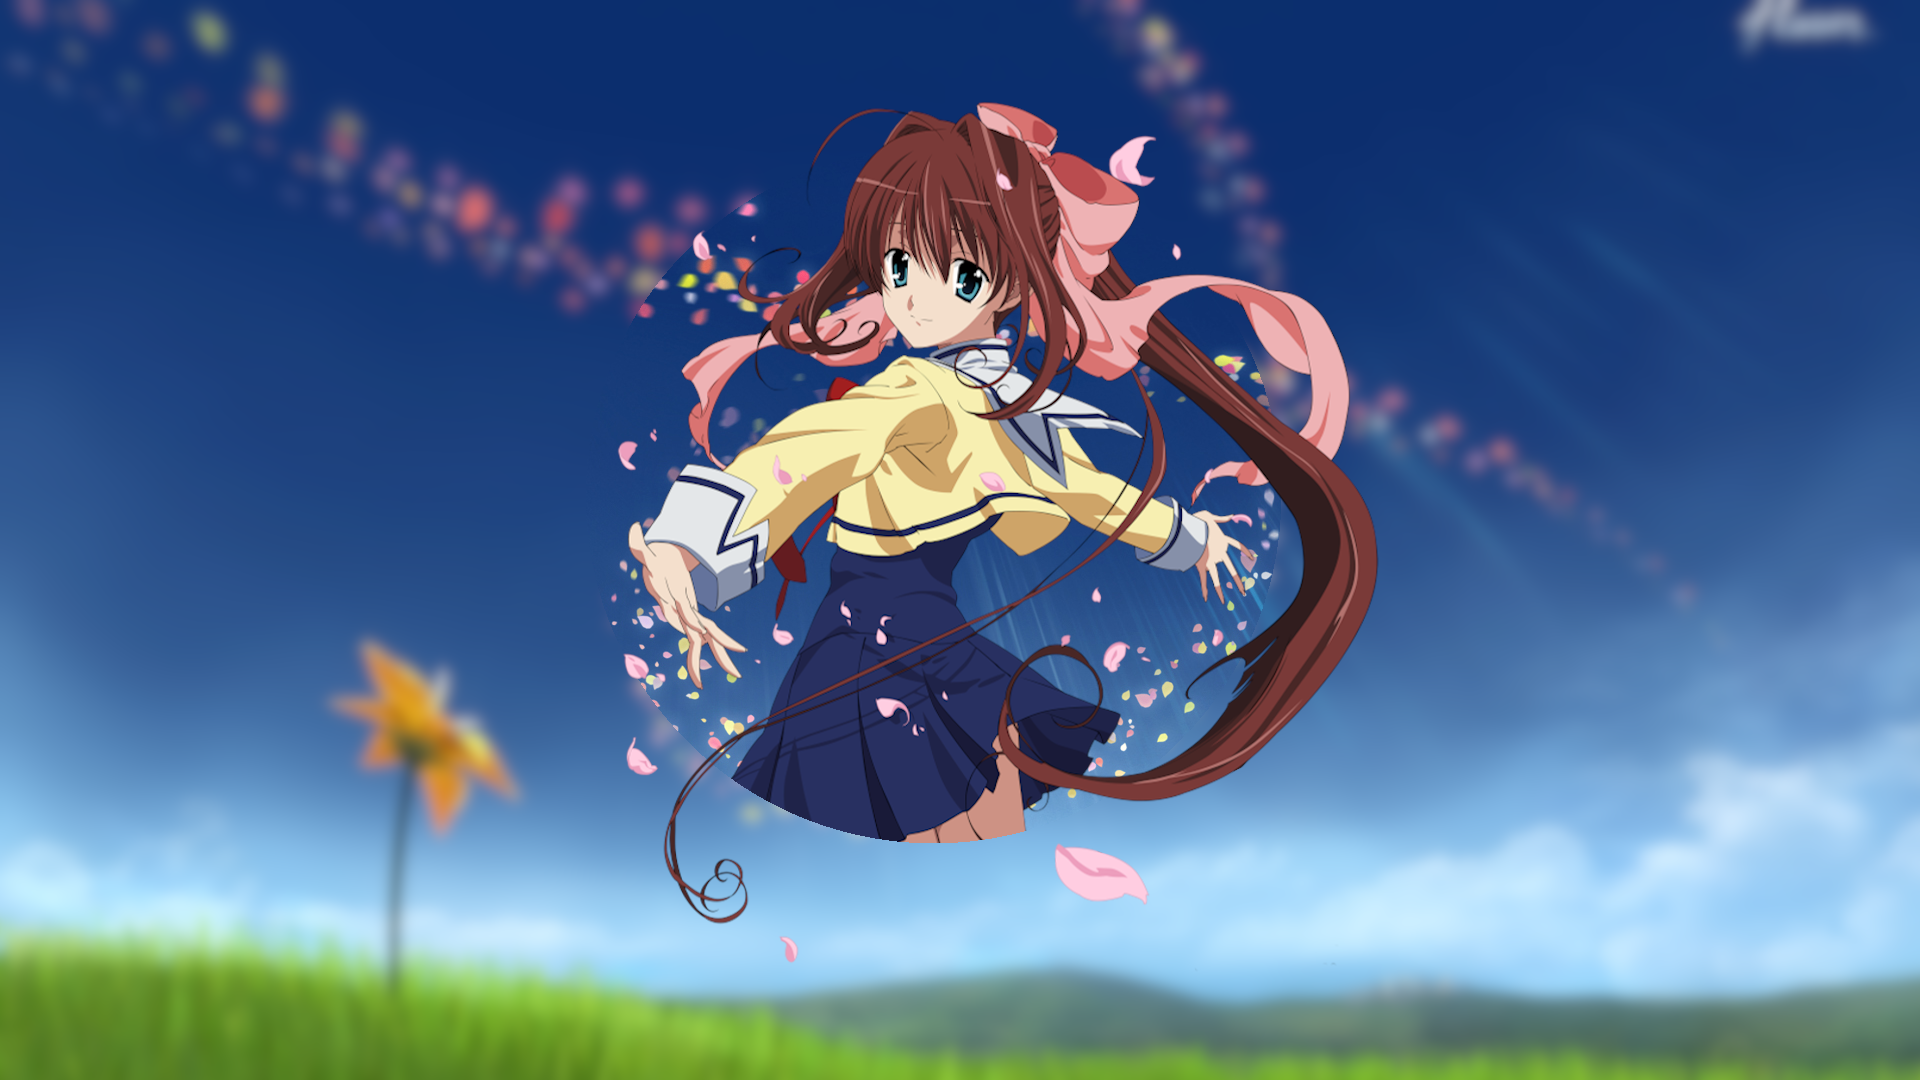 Anime 1920x1080 picture-in-picture flowers petals